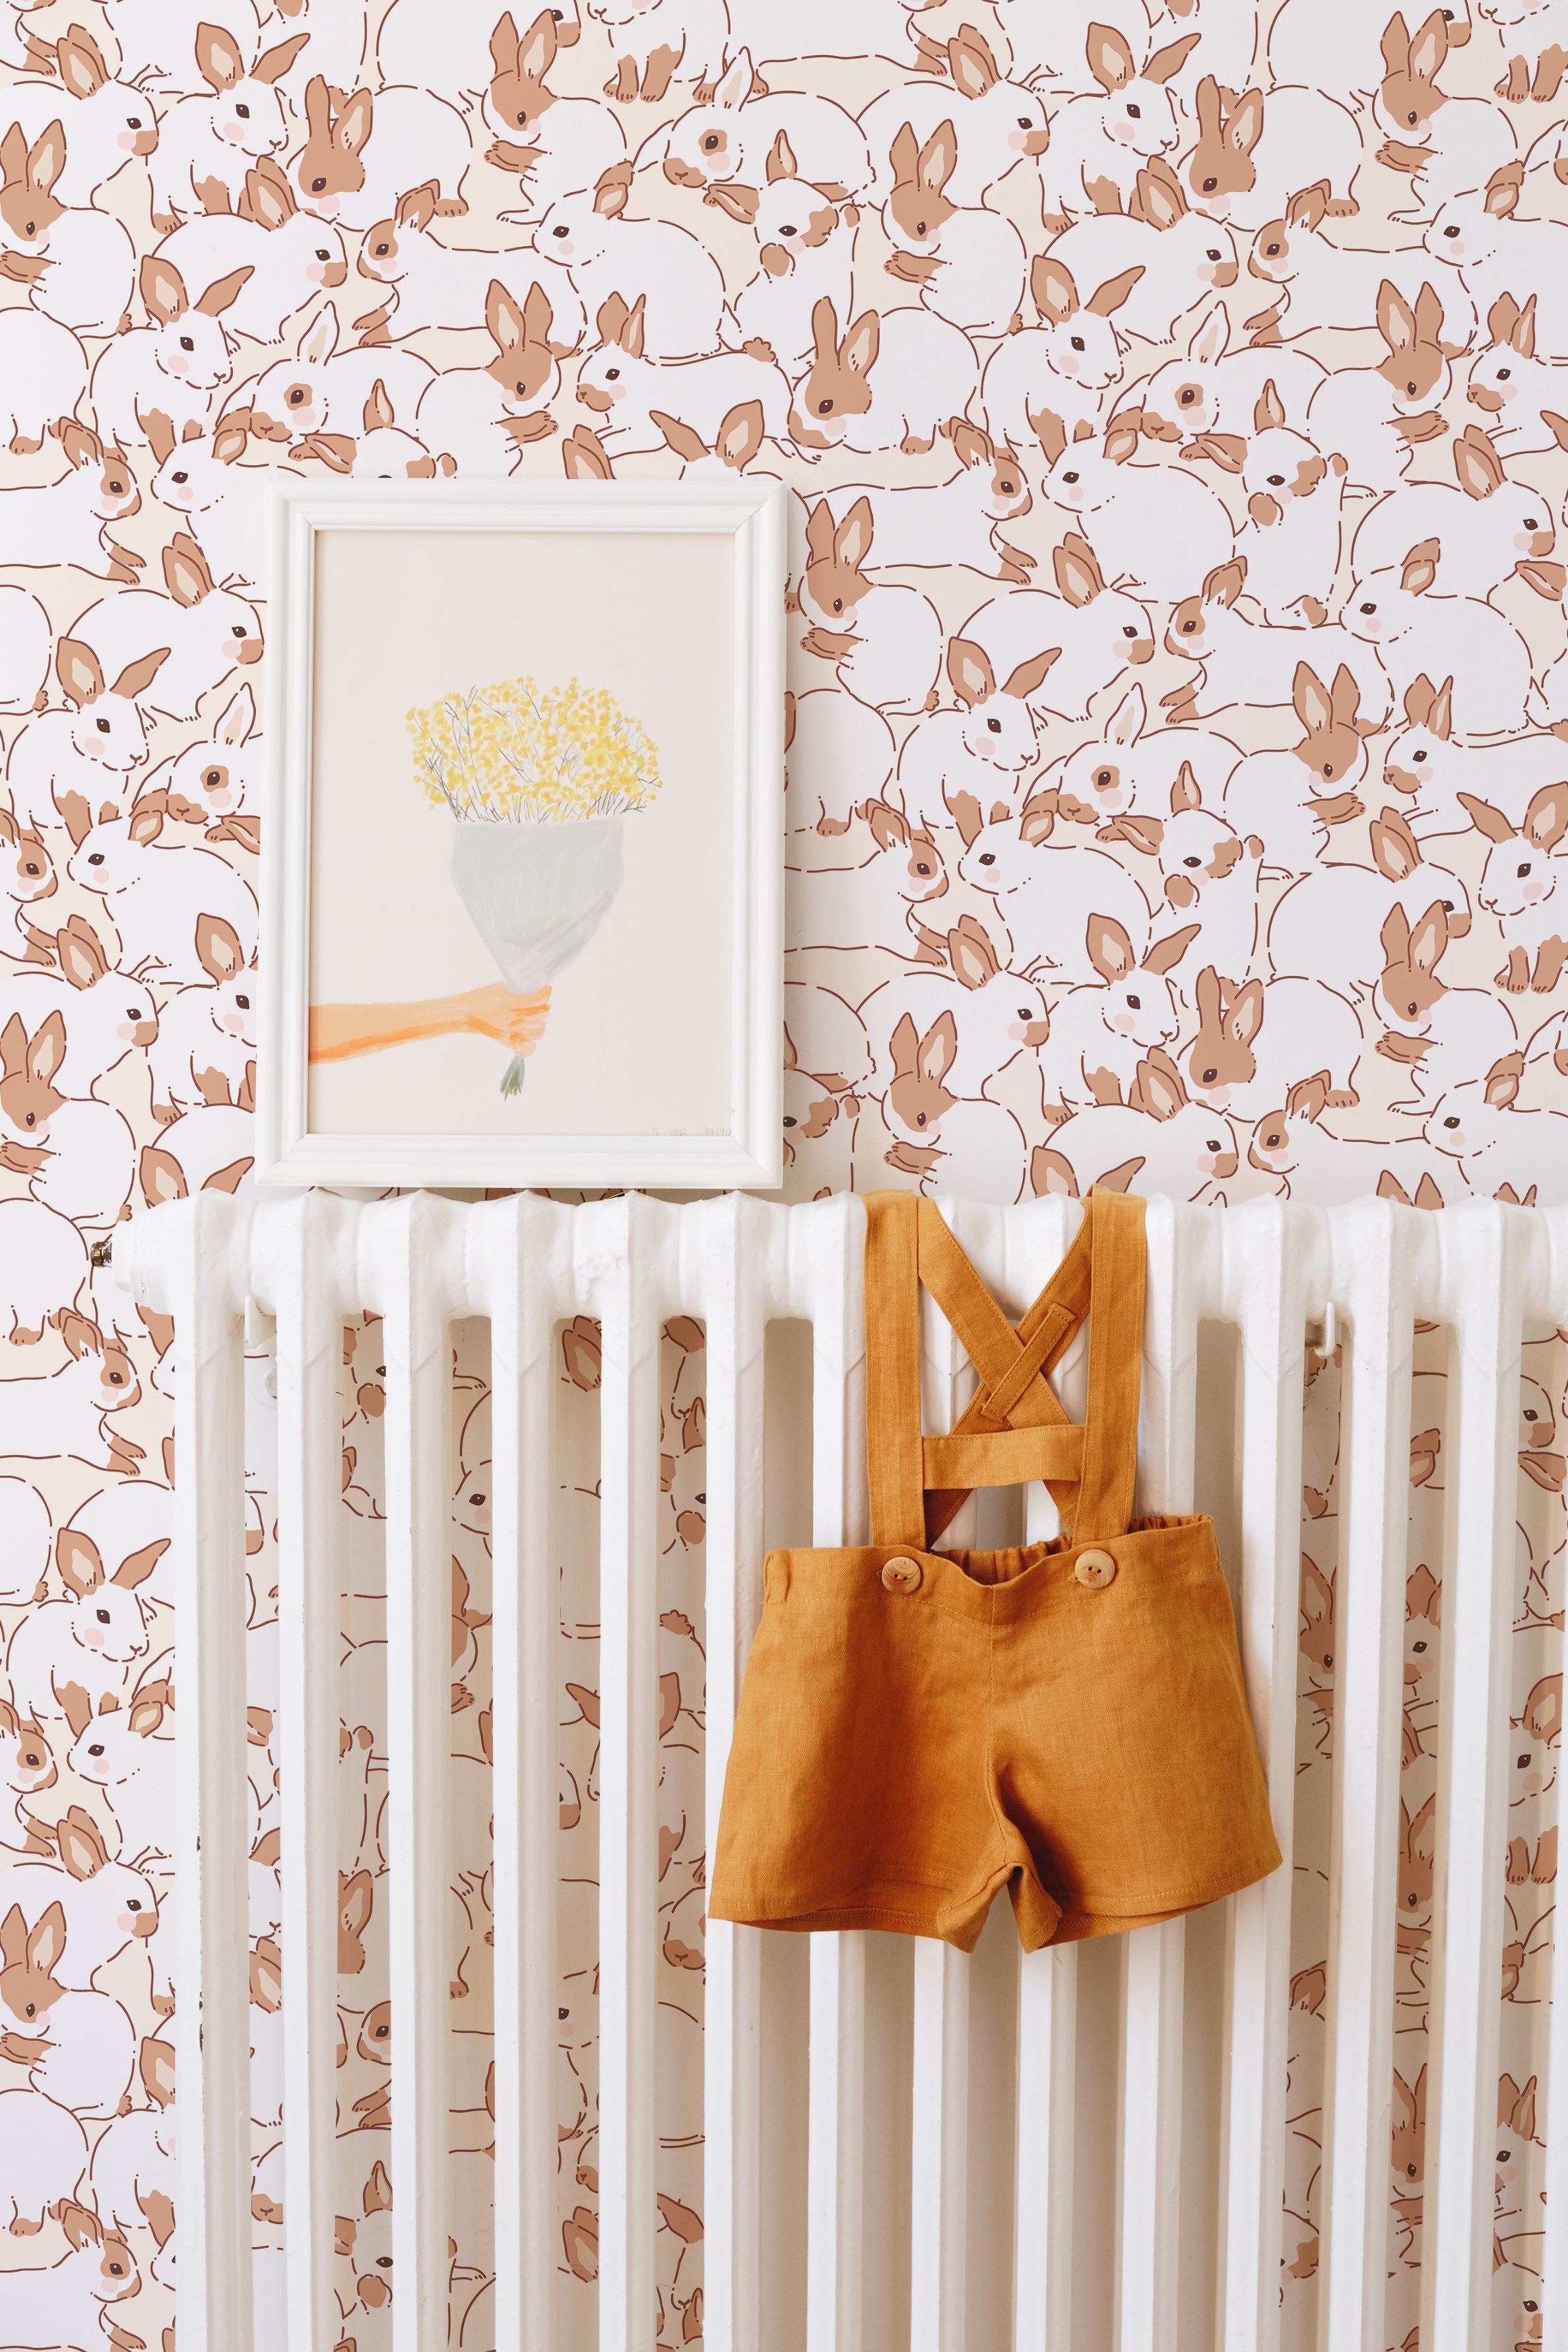 A cozy nursery scene featuring Lapinou Wallpaper with a pattern of playful beige bunnies on a cream background. A white crib is against the wall, adorned with a framed art piece of a hand holding a bouquet and a pair of mustard yellow toddler suspenders hanging on the crib rail.